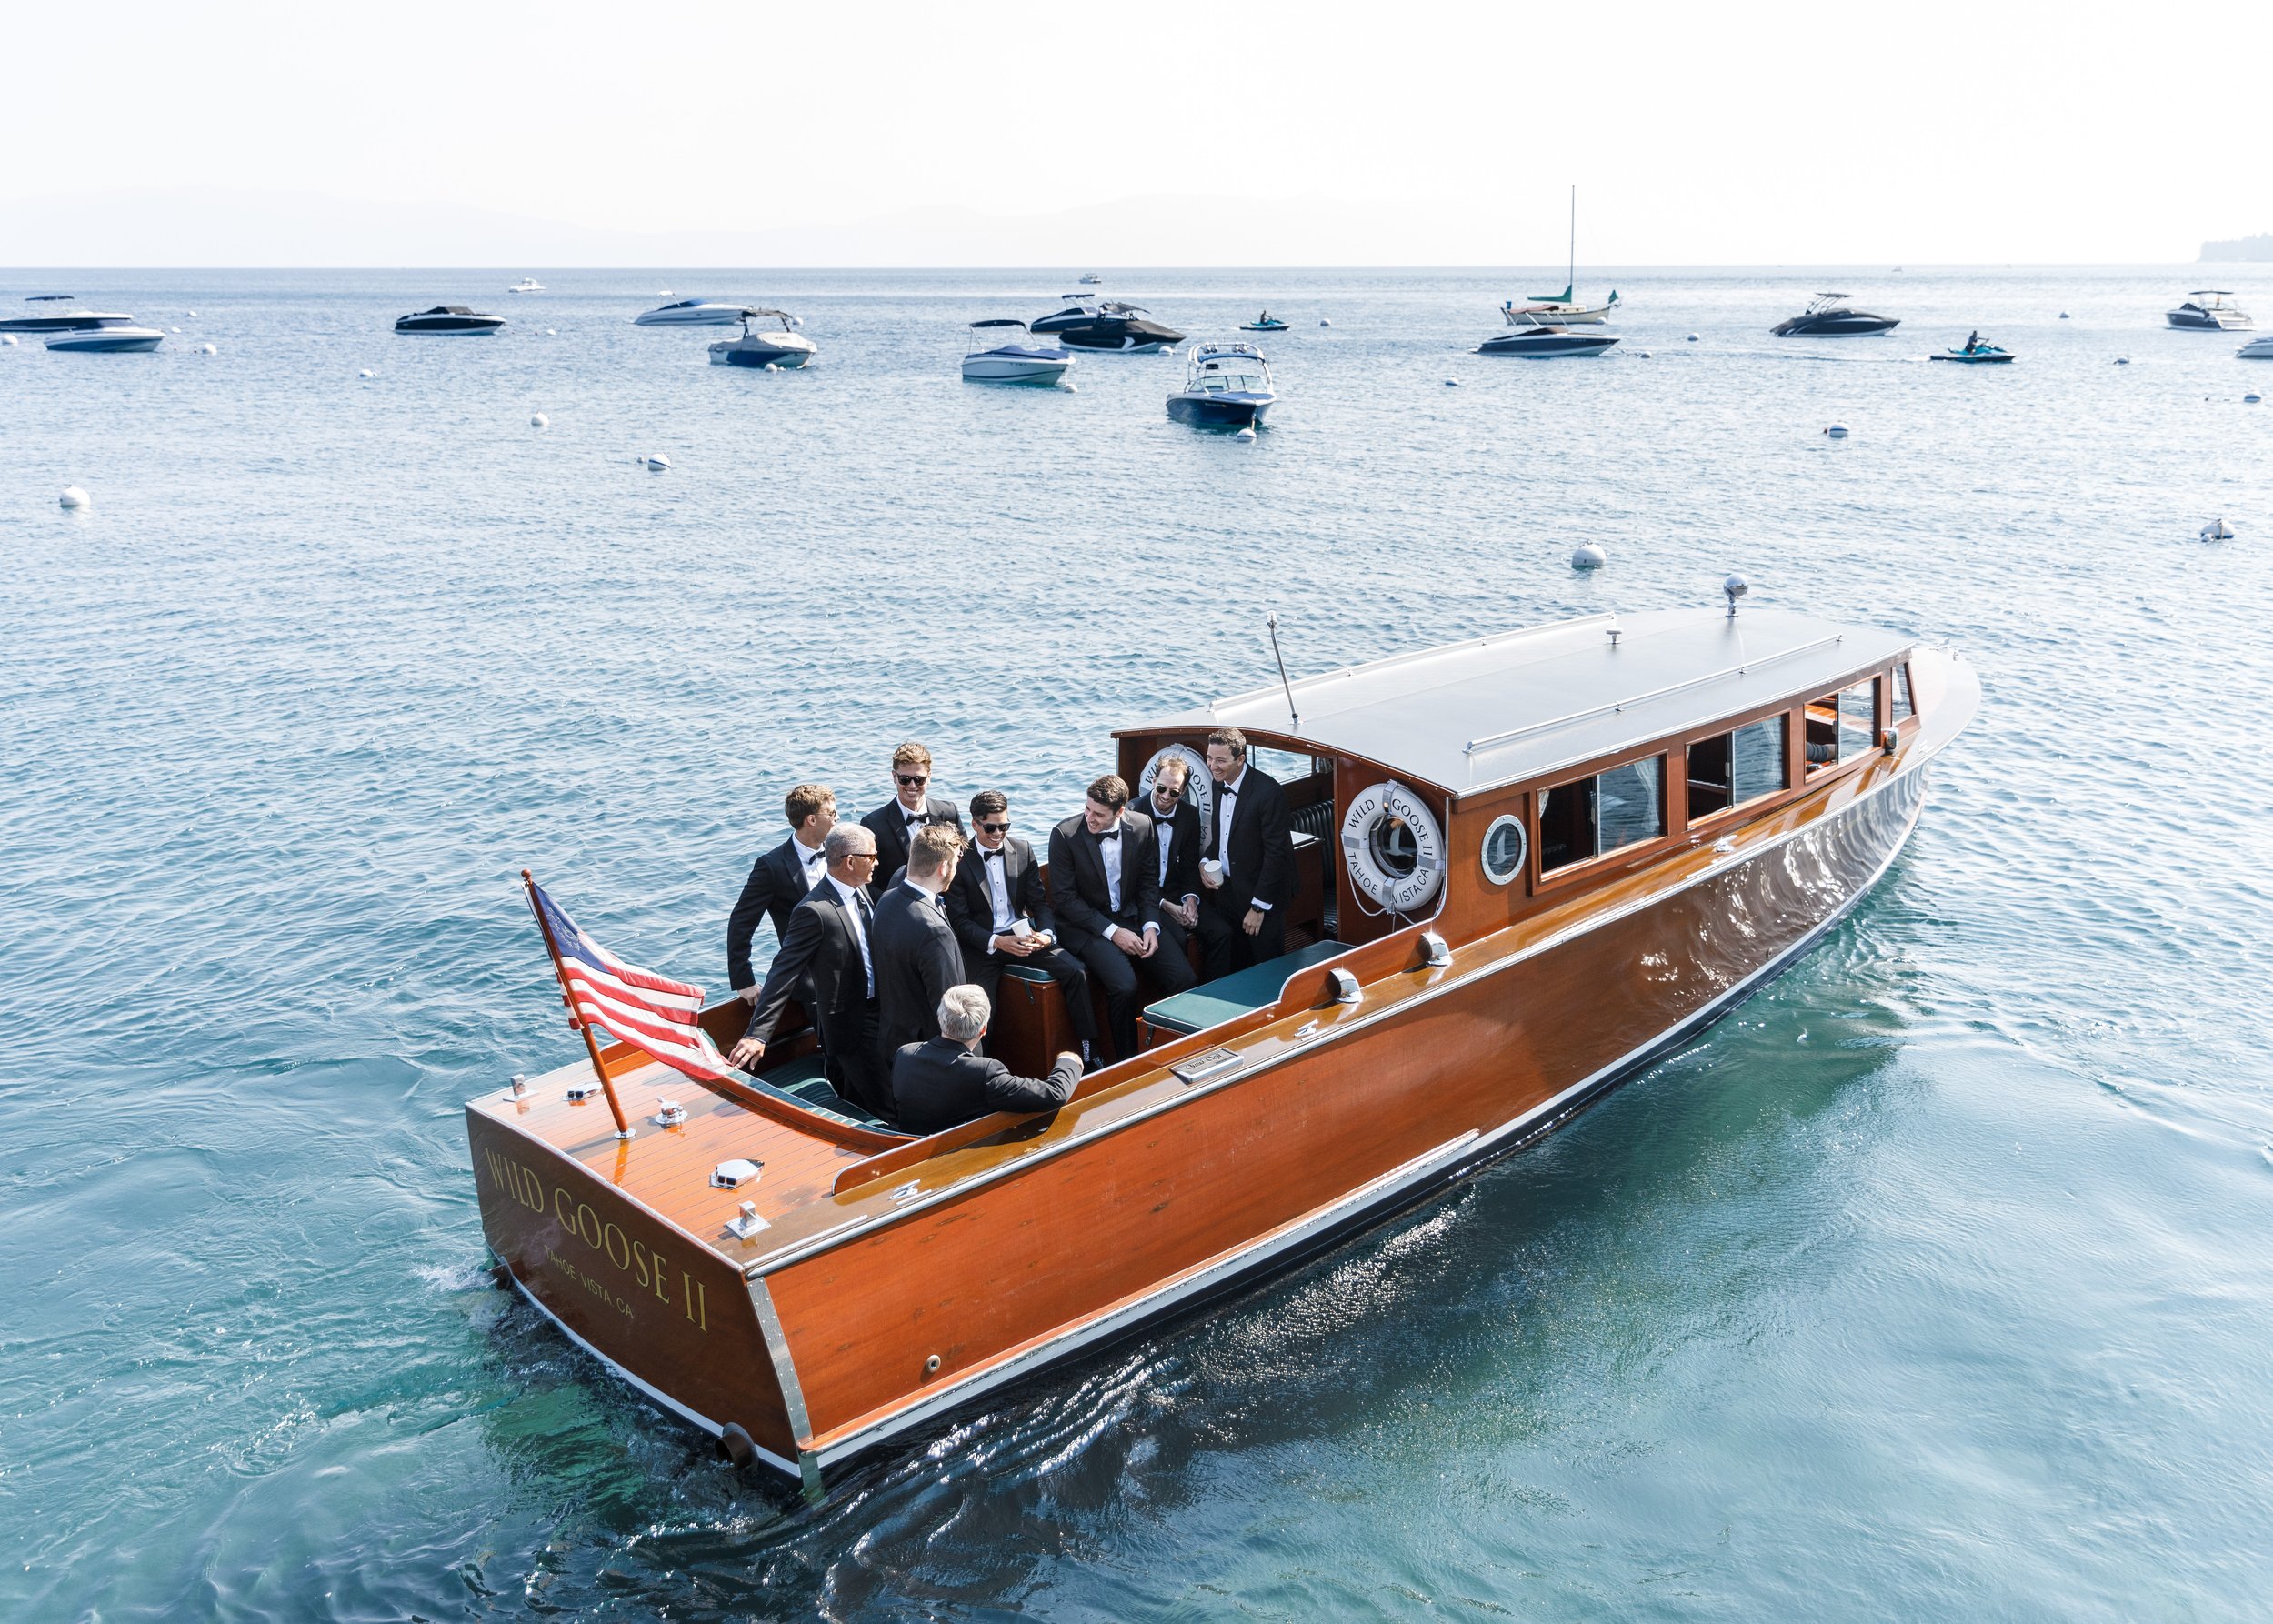  Groomsmen Party on a boat on the blue waters of Lake Tahoe by Savanna Richardson Photography. bachelor party groomsmen on boat Tahoe wedding idea #savannarichardsonphotography #tahoewedding #lakesidewedding #outdoorwedding #summerwedding #laketahoe 